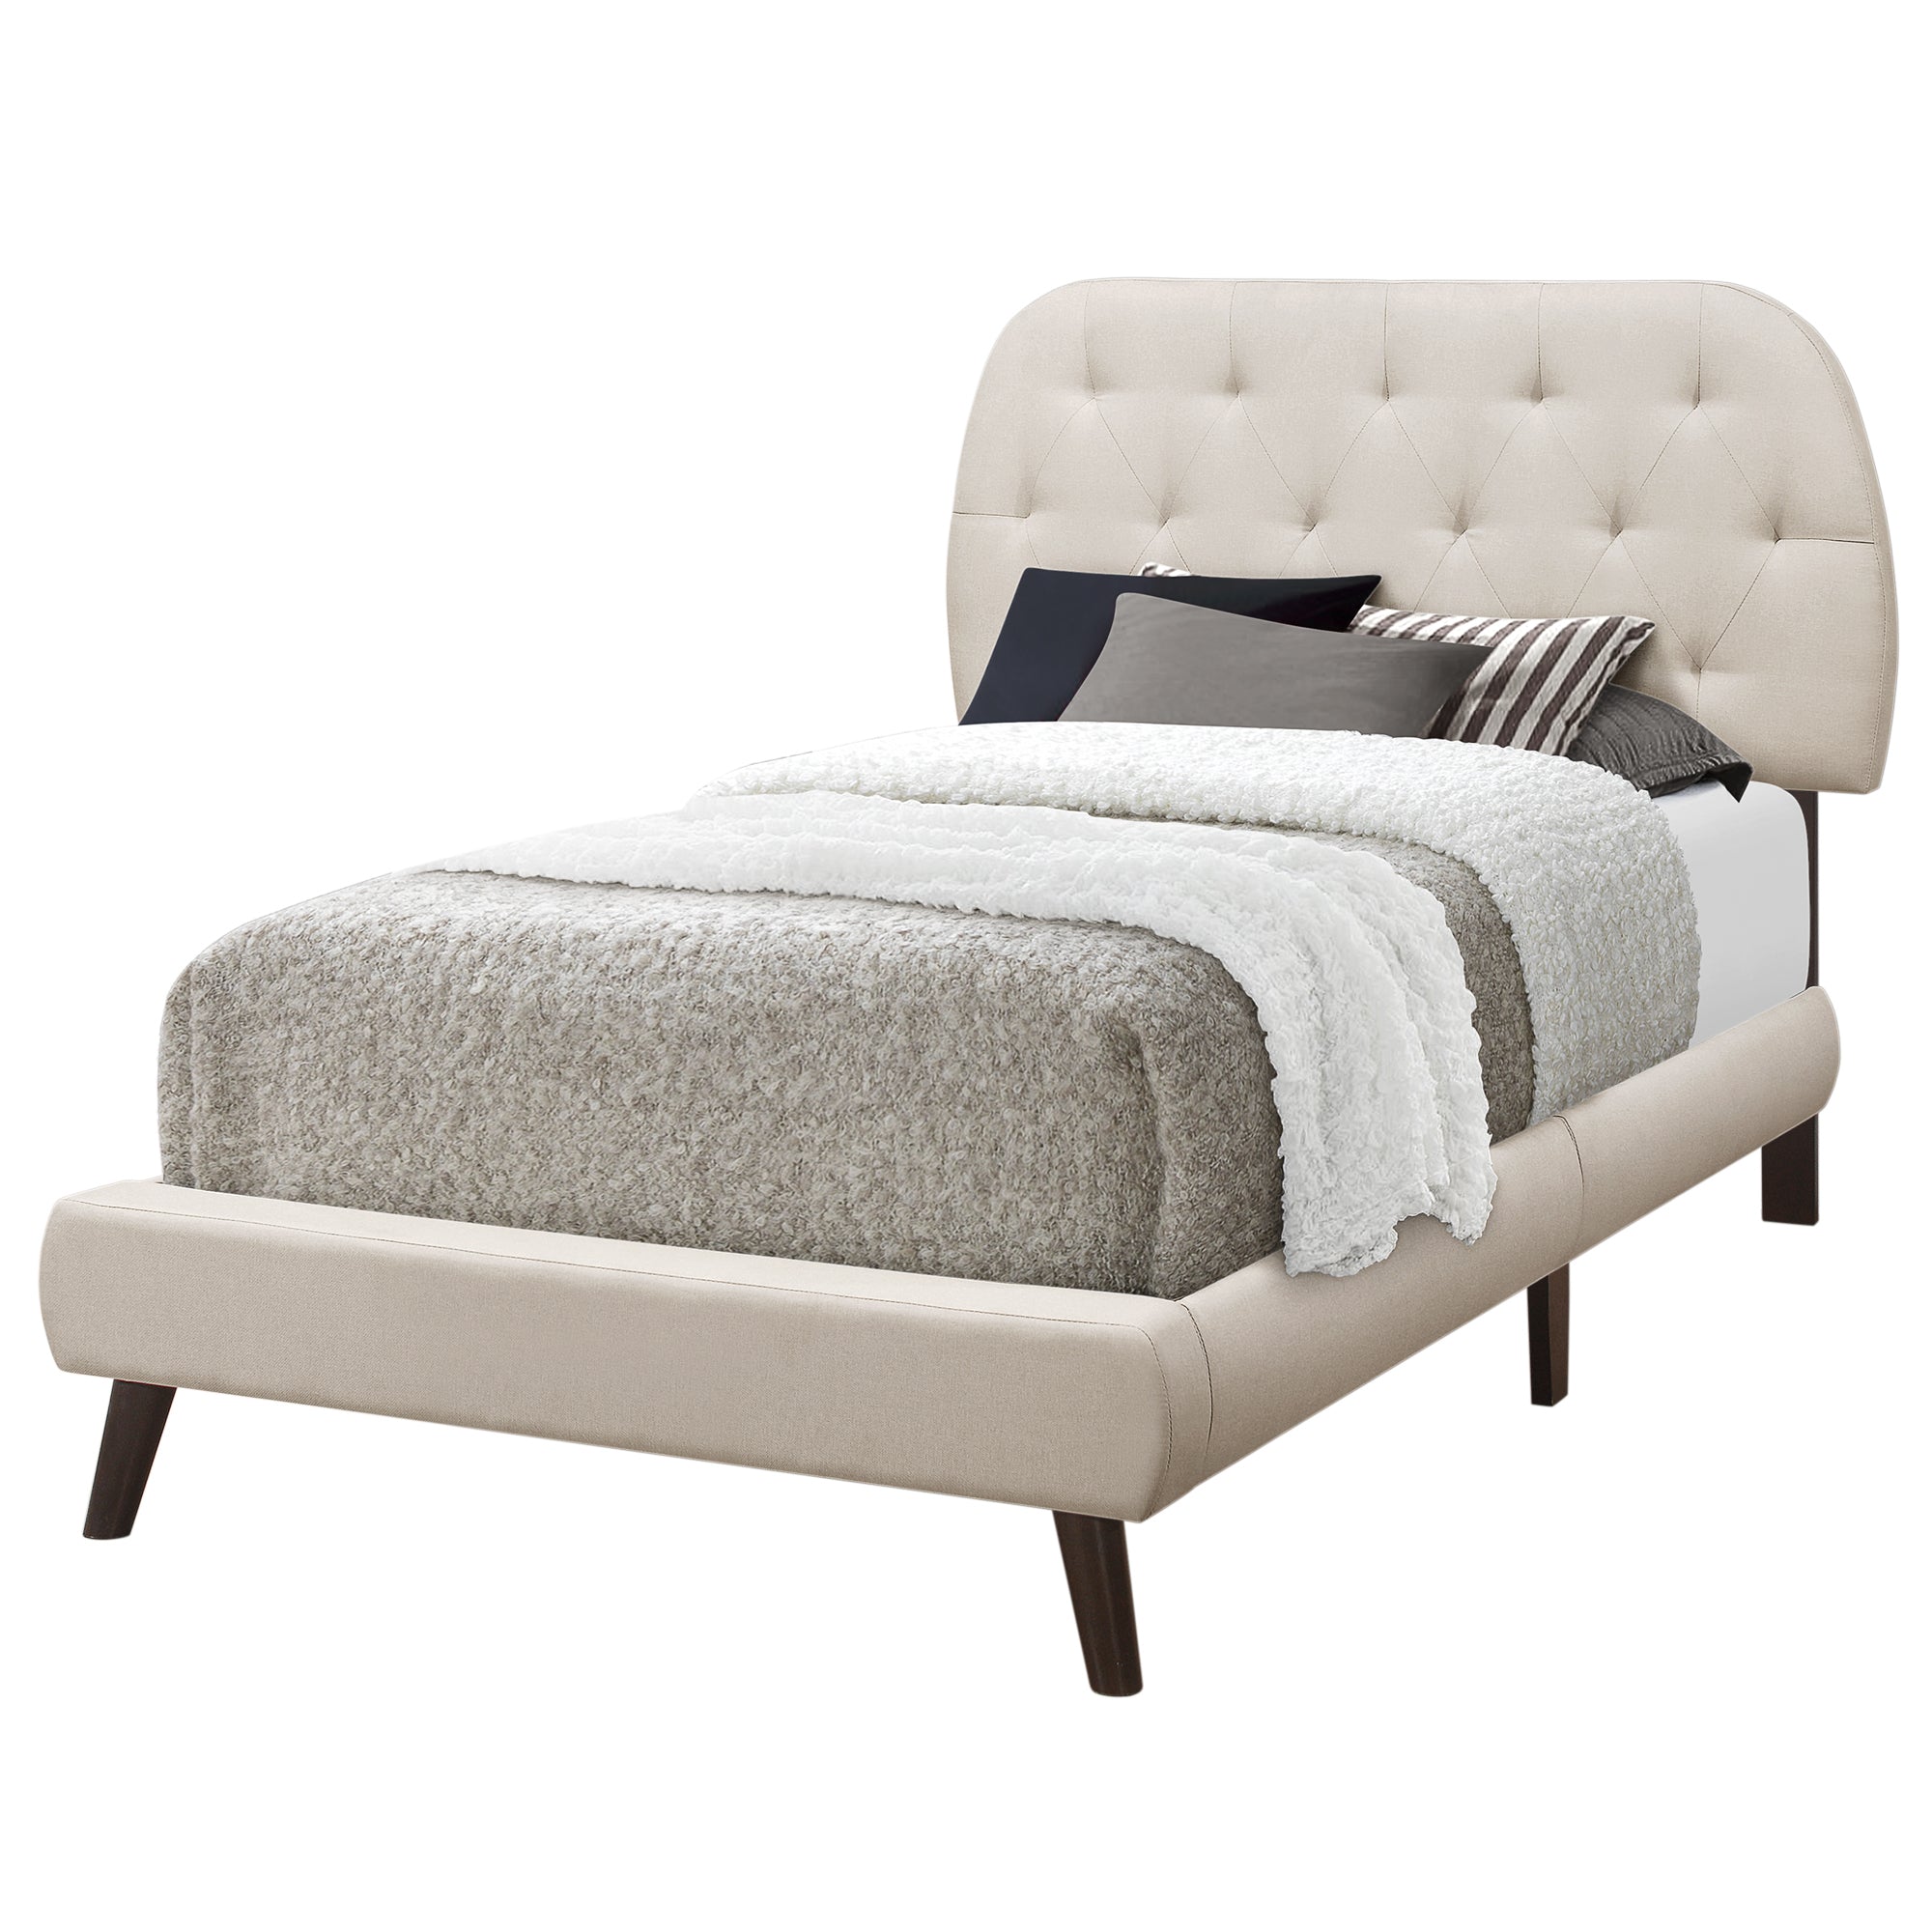 Bed - Twin Size / Beige Linen With Brown Wood Legs